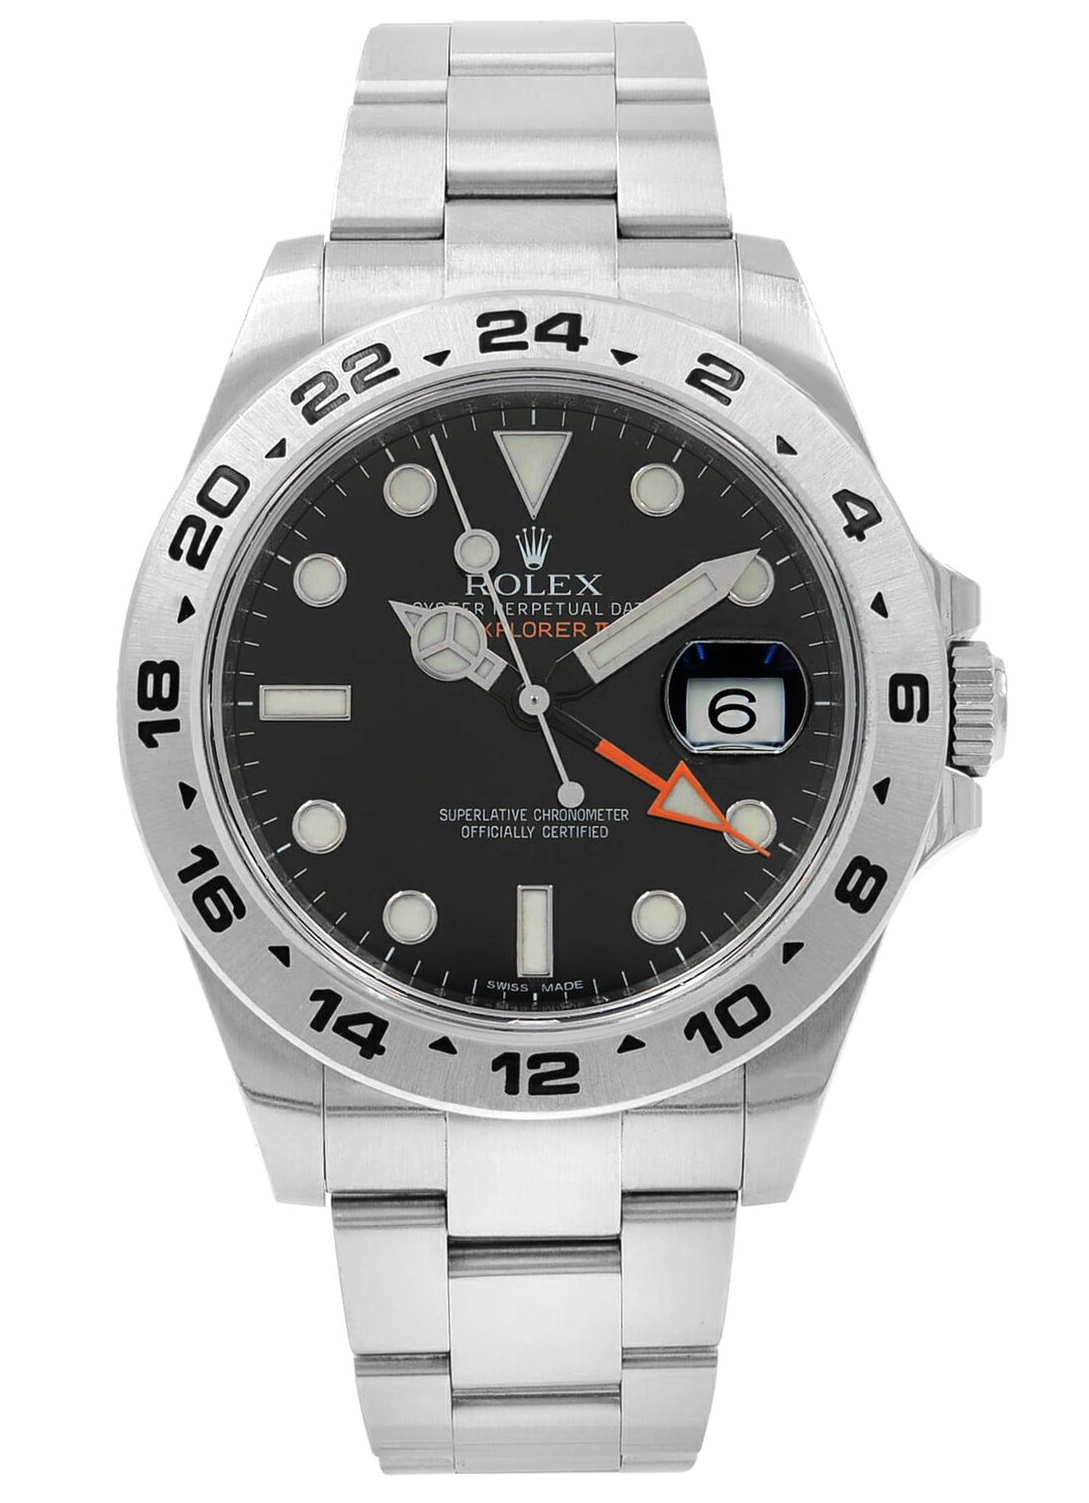 Up To 30% Off Authenticity Verified Rolex Watches On eBay Right Now Rolex Sales & Auctions 